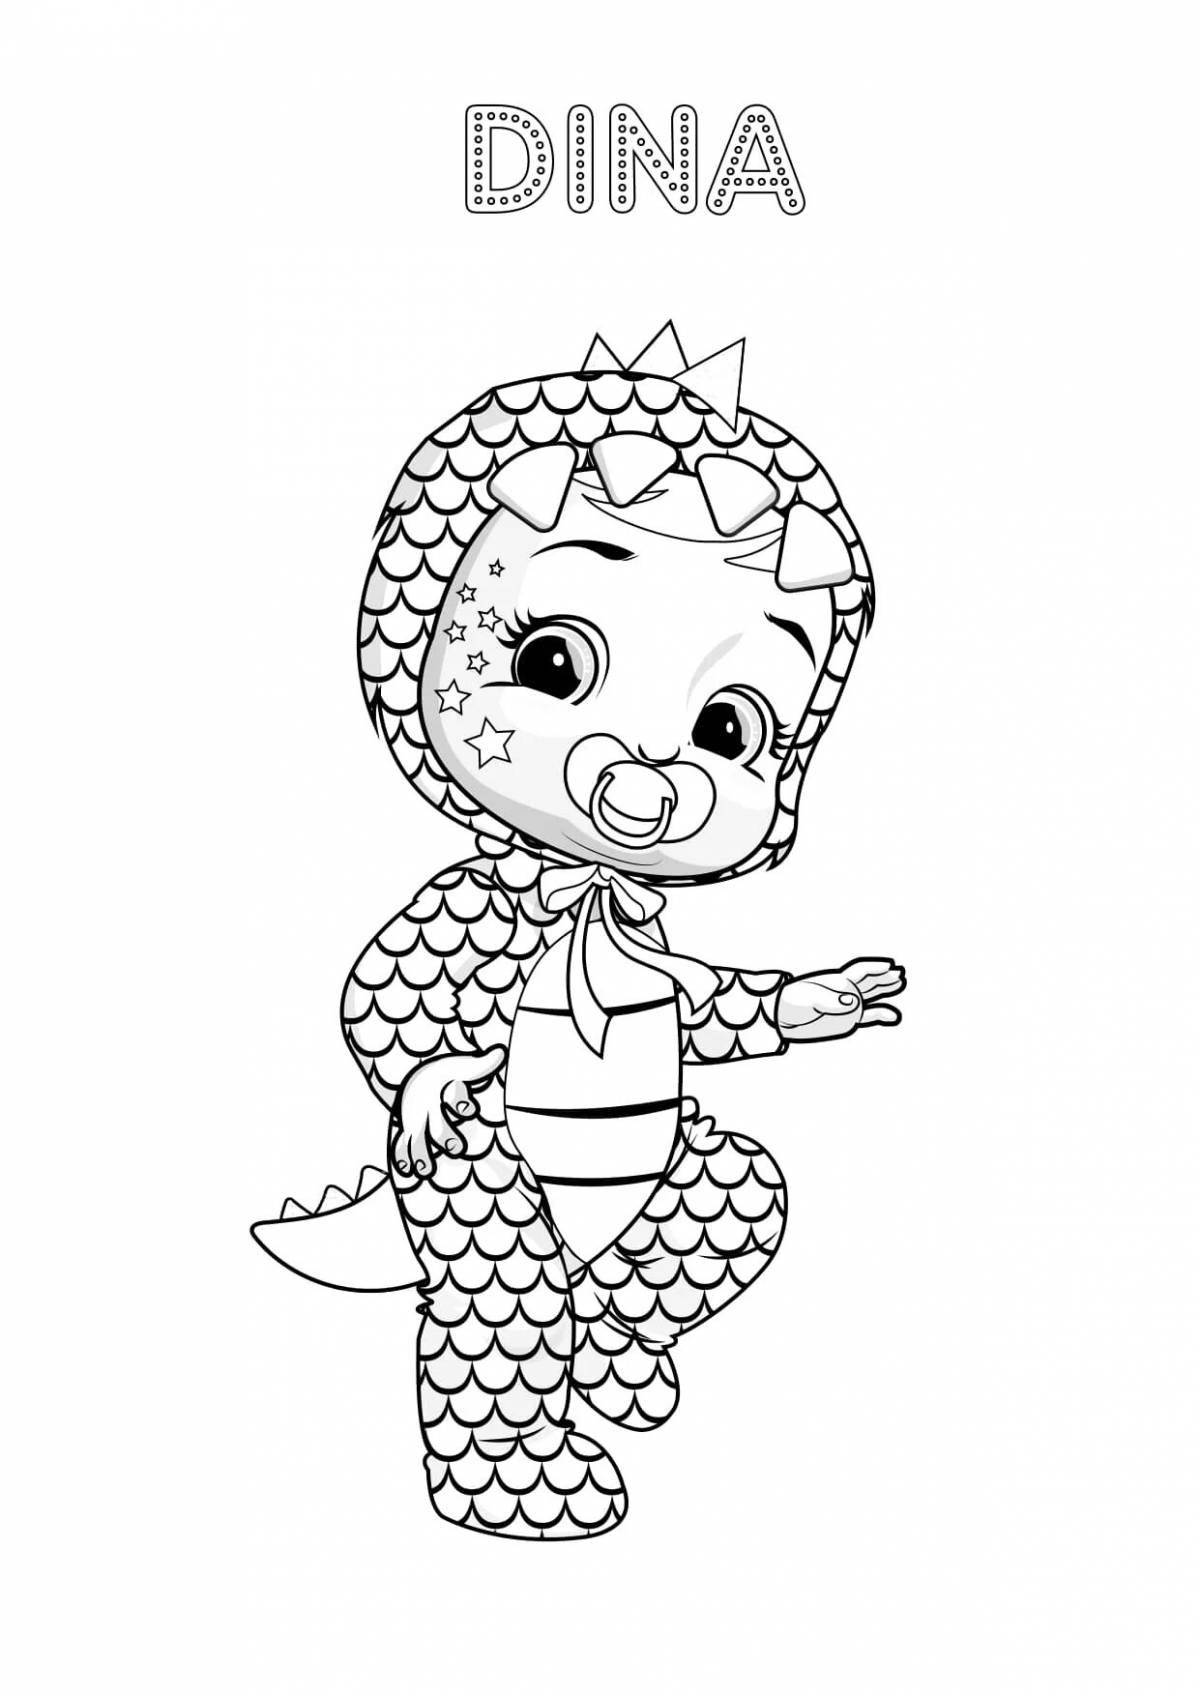 Colourful edge baby coloring book